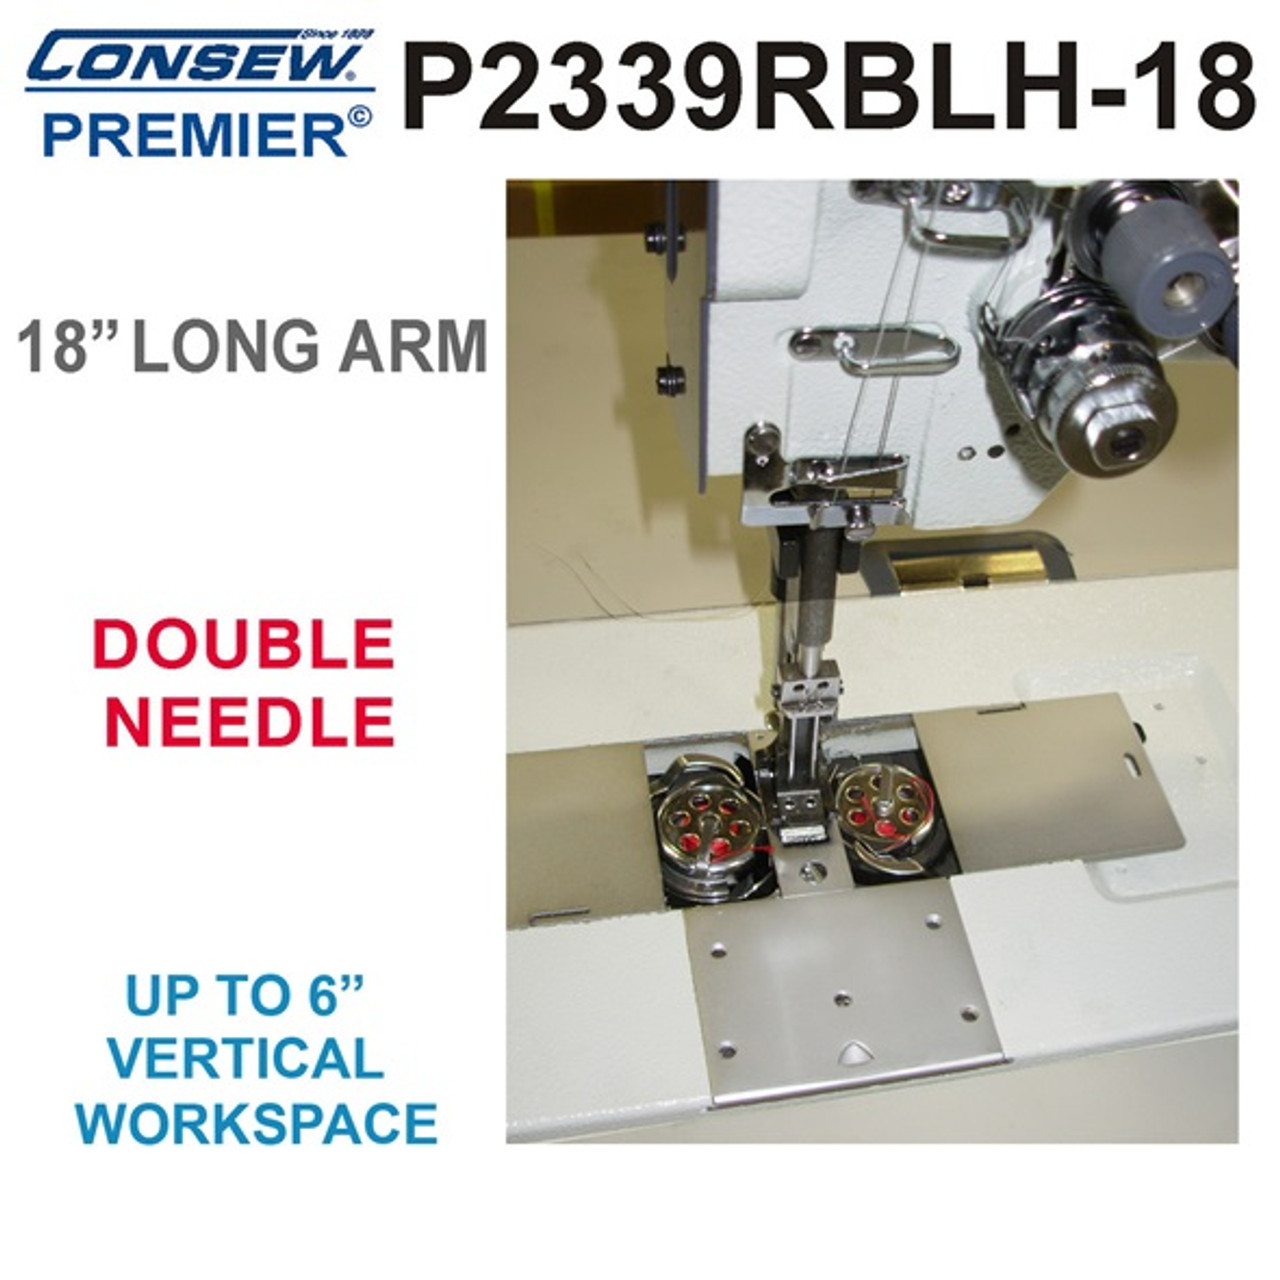 Consew Premier P2339RBLH-18 Double Needle Long Arm Machine With Table and Servo Motor